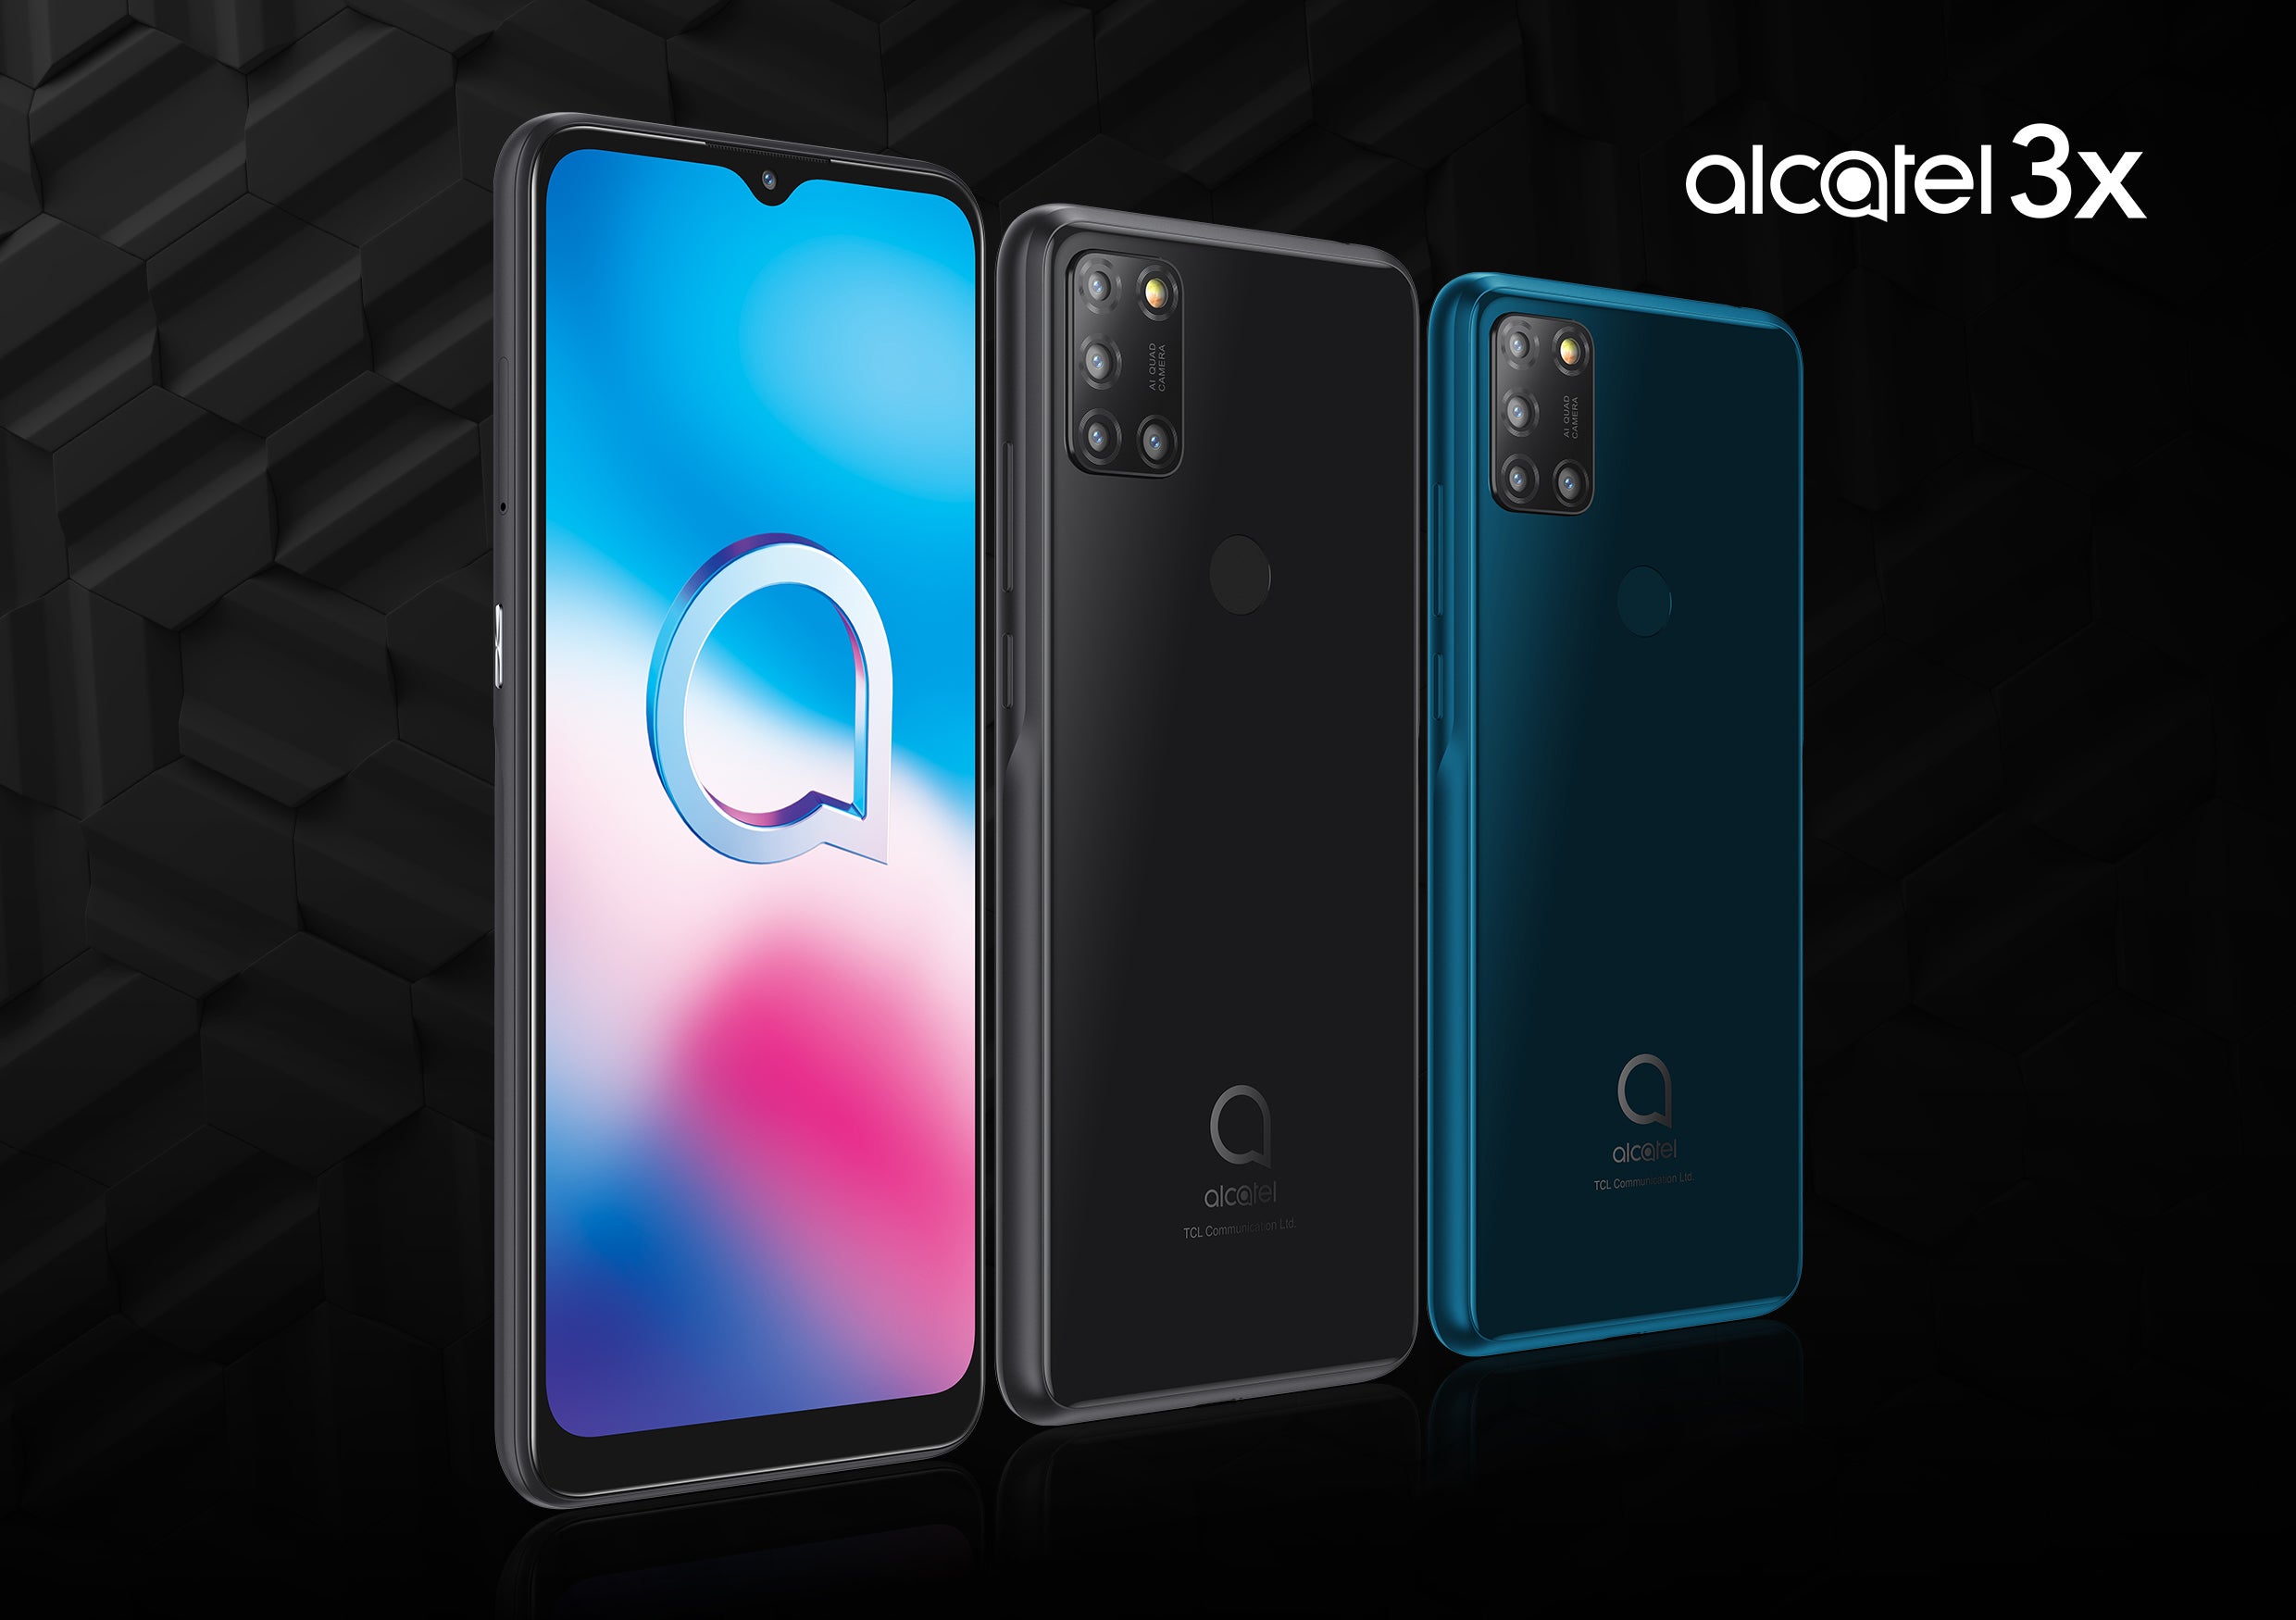 Alcatel reveals two new affordable smartphones for European markets